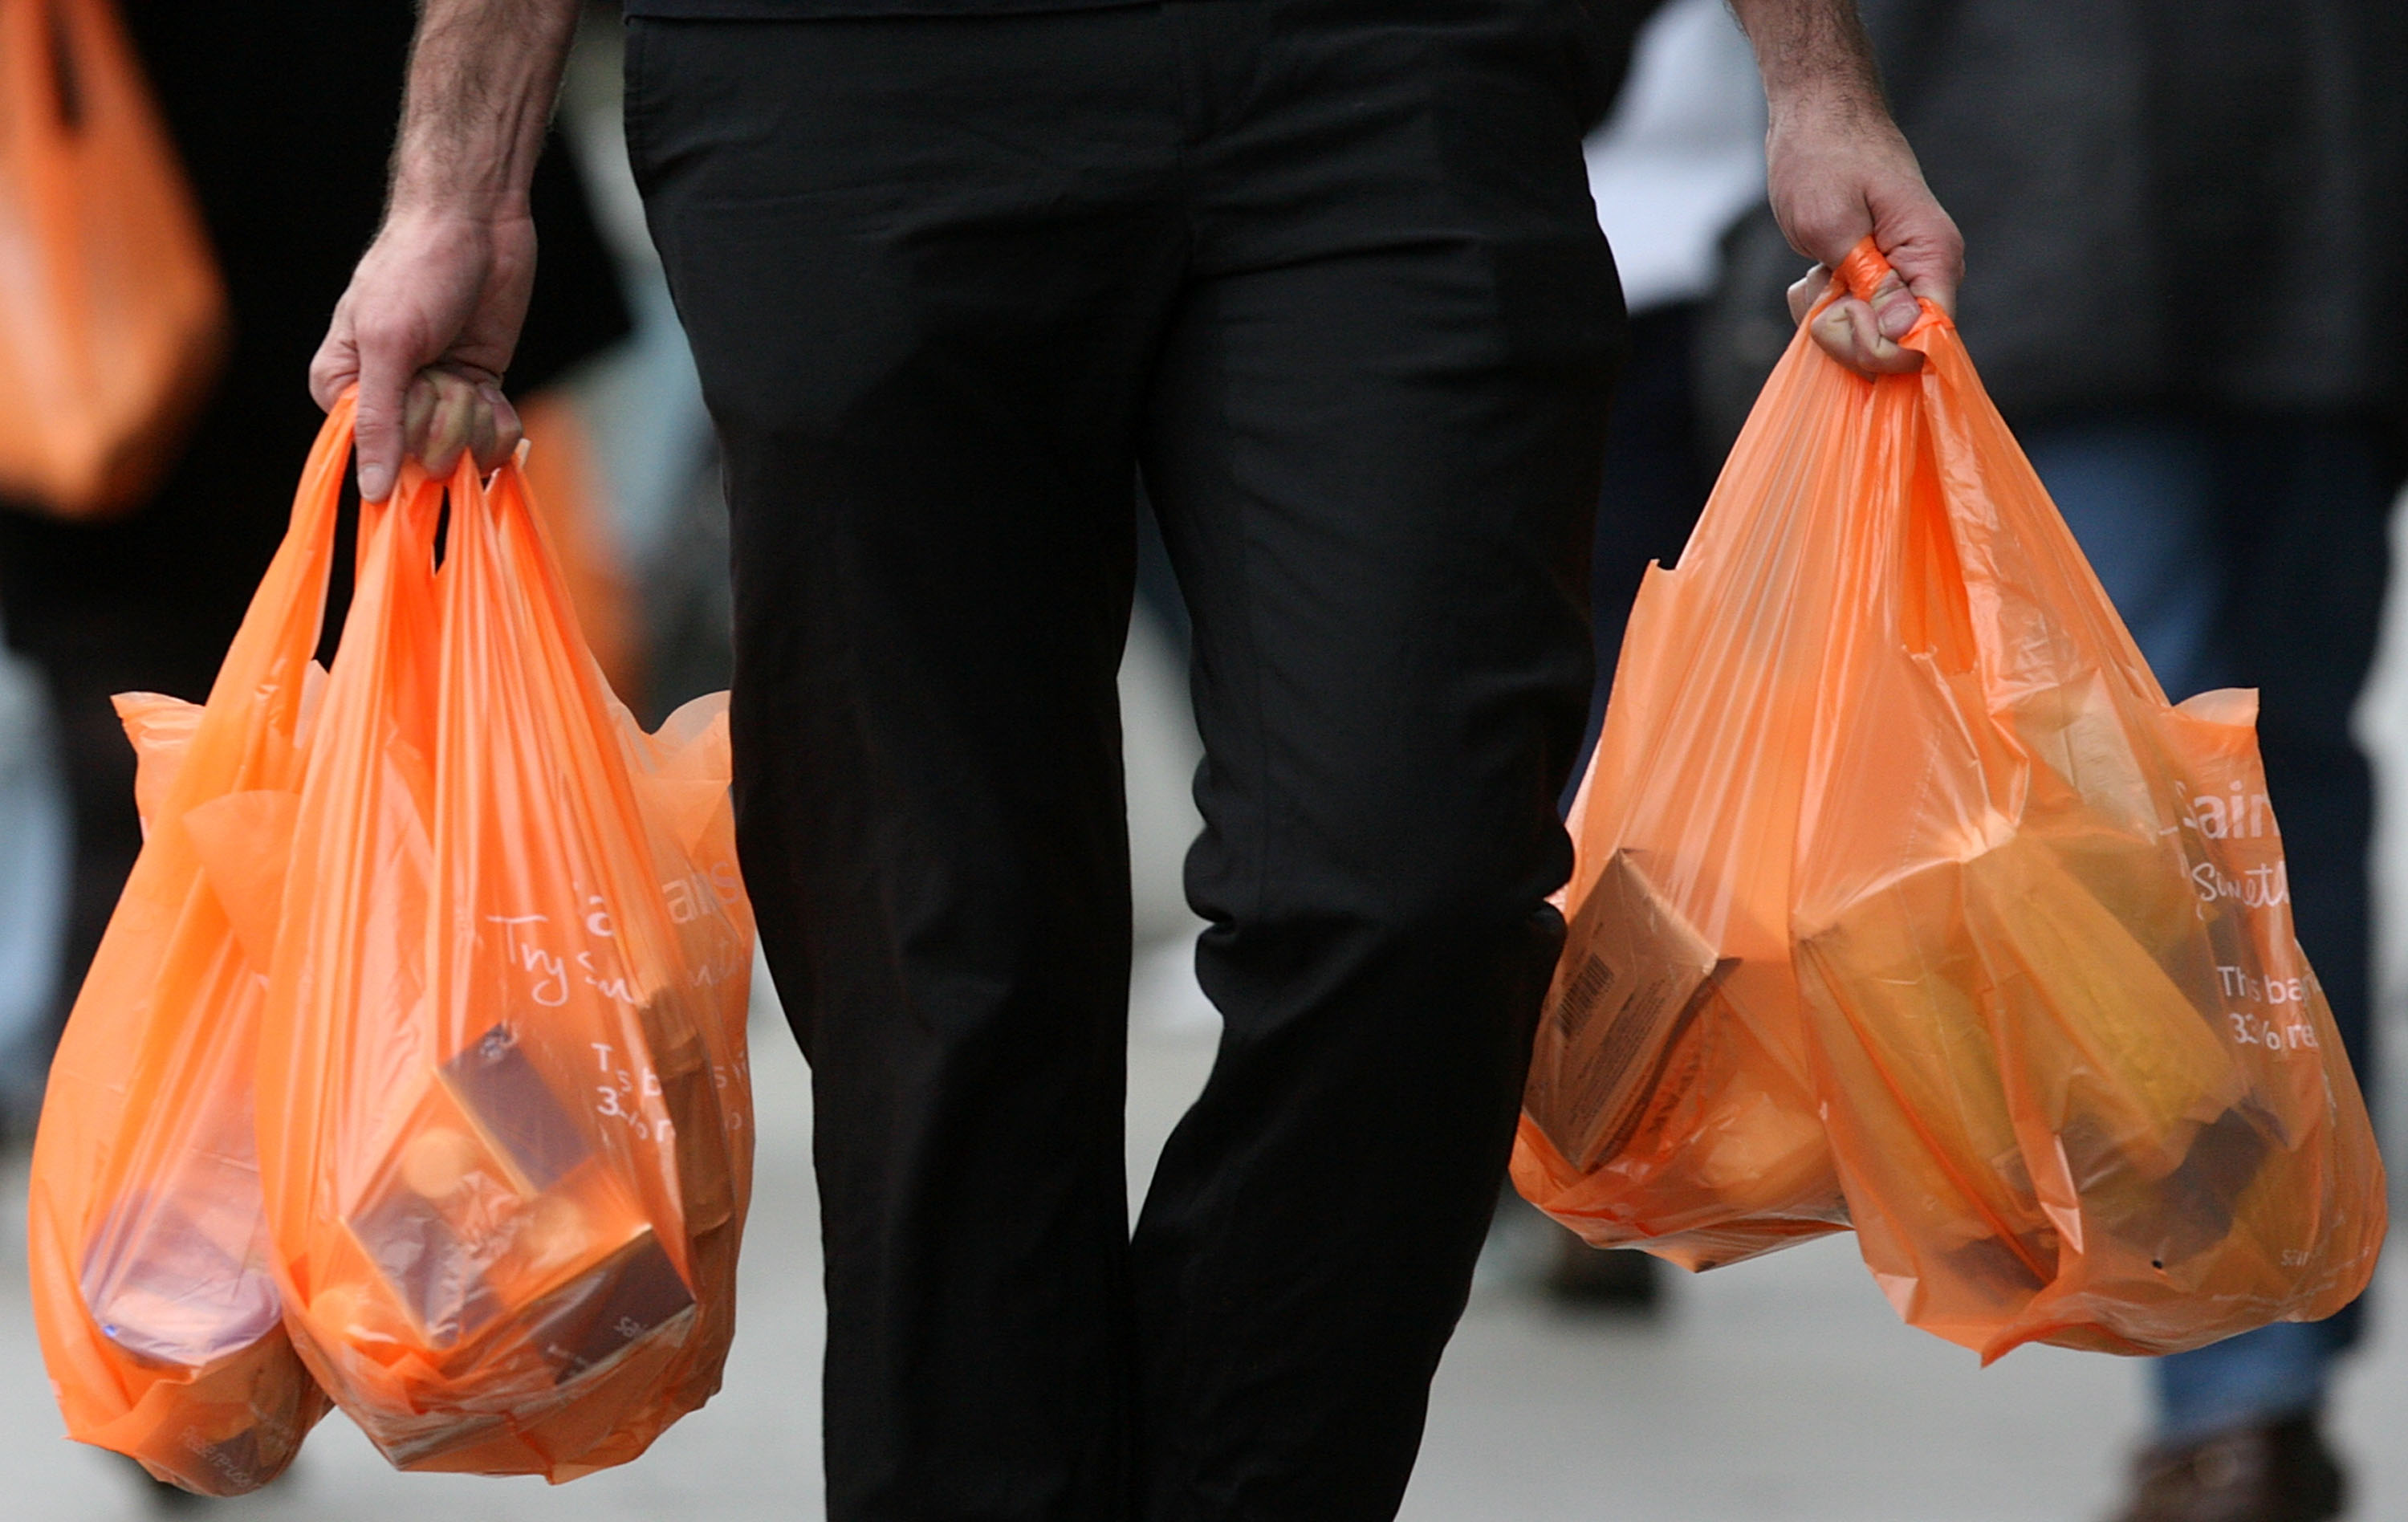 How a Ban on Plastic Bags Can Go Wrong - Bloomberg